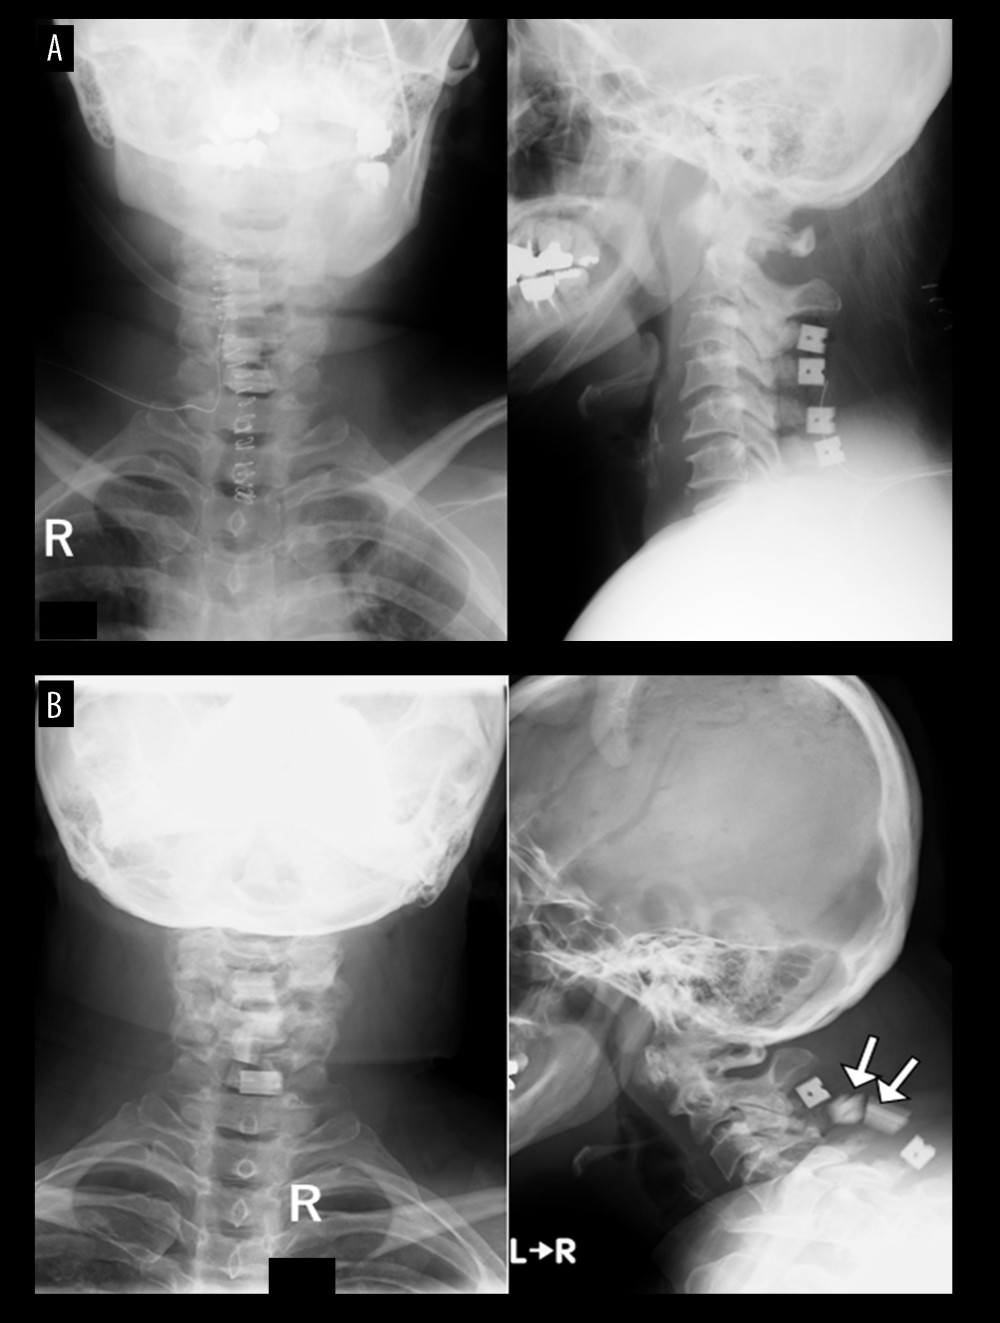 Case 1. A 39-year-old woman with athetoid and dystonic cerebral palsy associated with degenerative cervical spondylotic myelopathy (postoperative findings). (A) The patient underwent C3-C6 laminoplasty. (B) At 4 months after surgery, the C4 and C5 spacers were dislocated (white arrows).